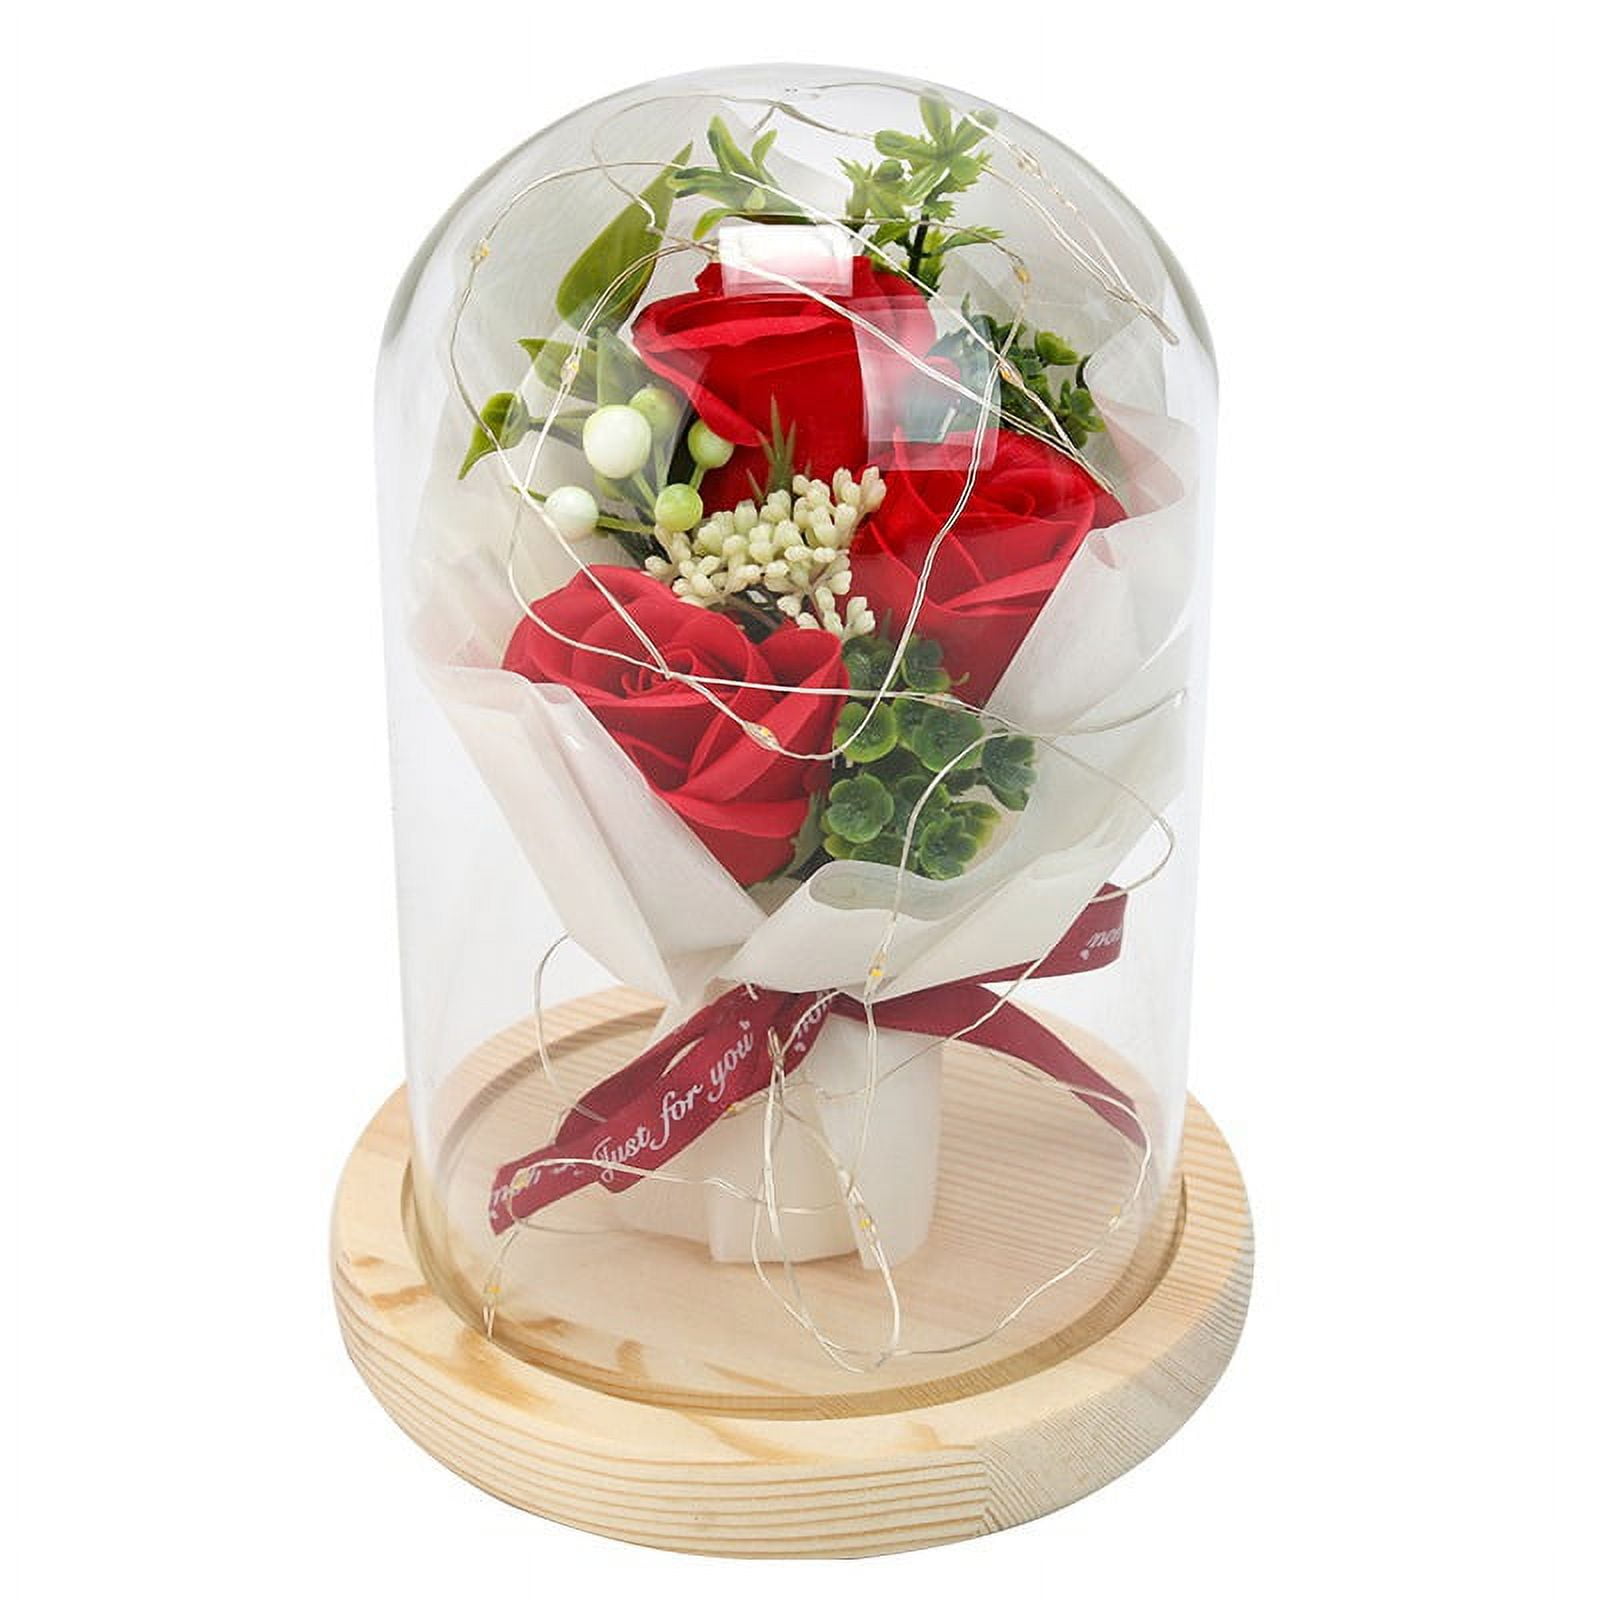  Tongtai Christmas Rose Flower Gifts for Women, Womens